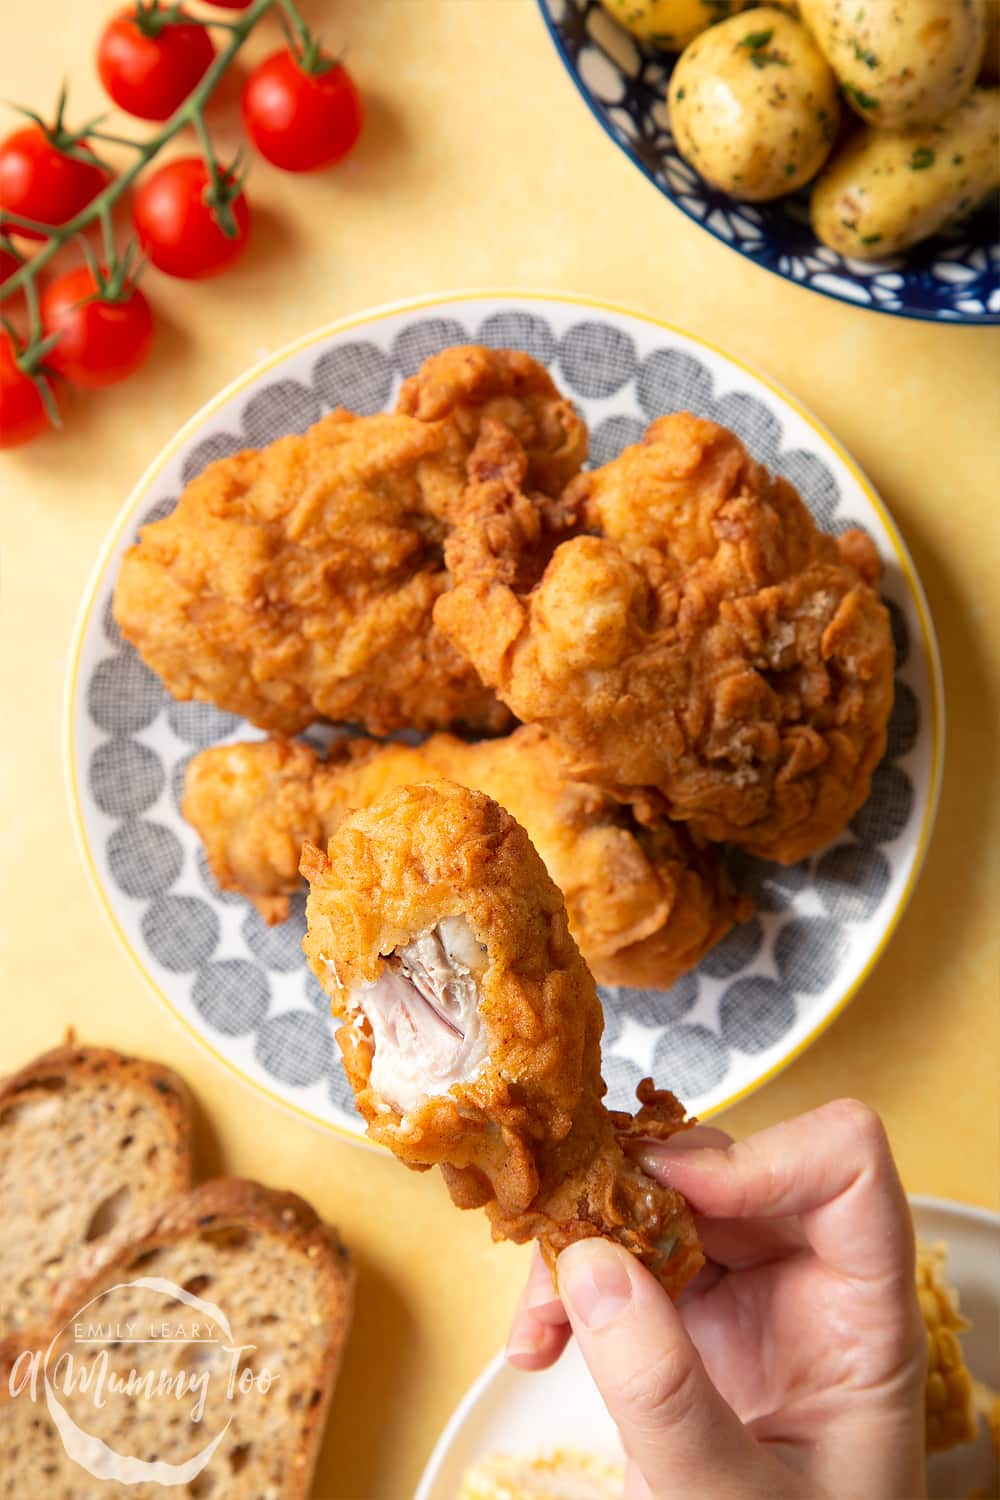 Gordon Ramsay’s buttermilk fried chicken arranged on a plate. A hand holds a well-coated drumstick, with a bite taken out.